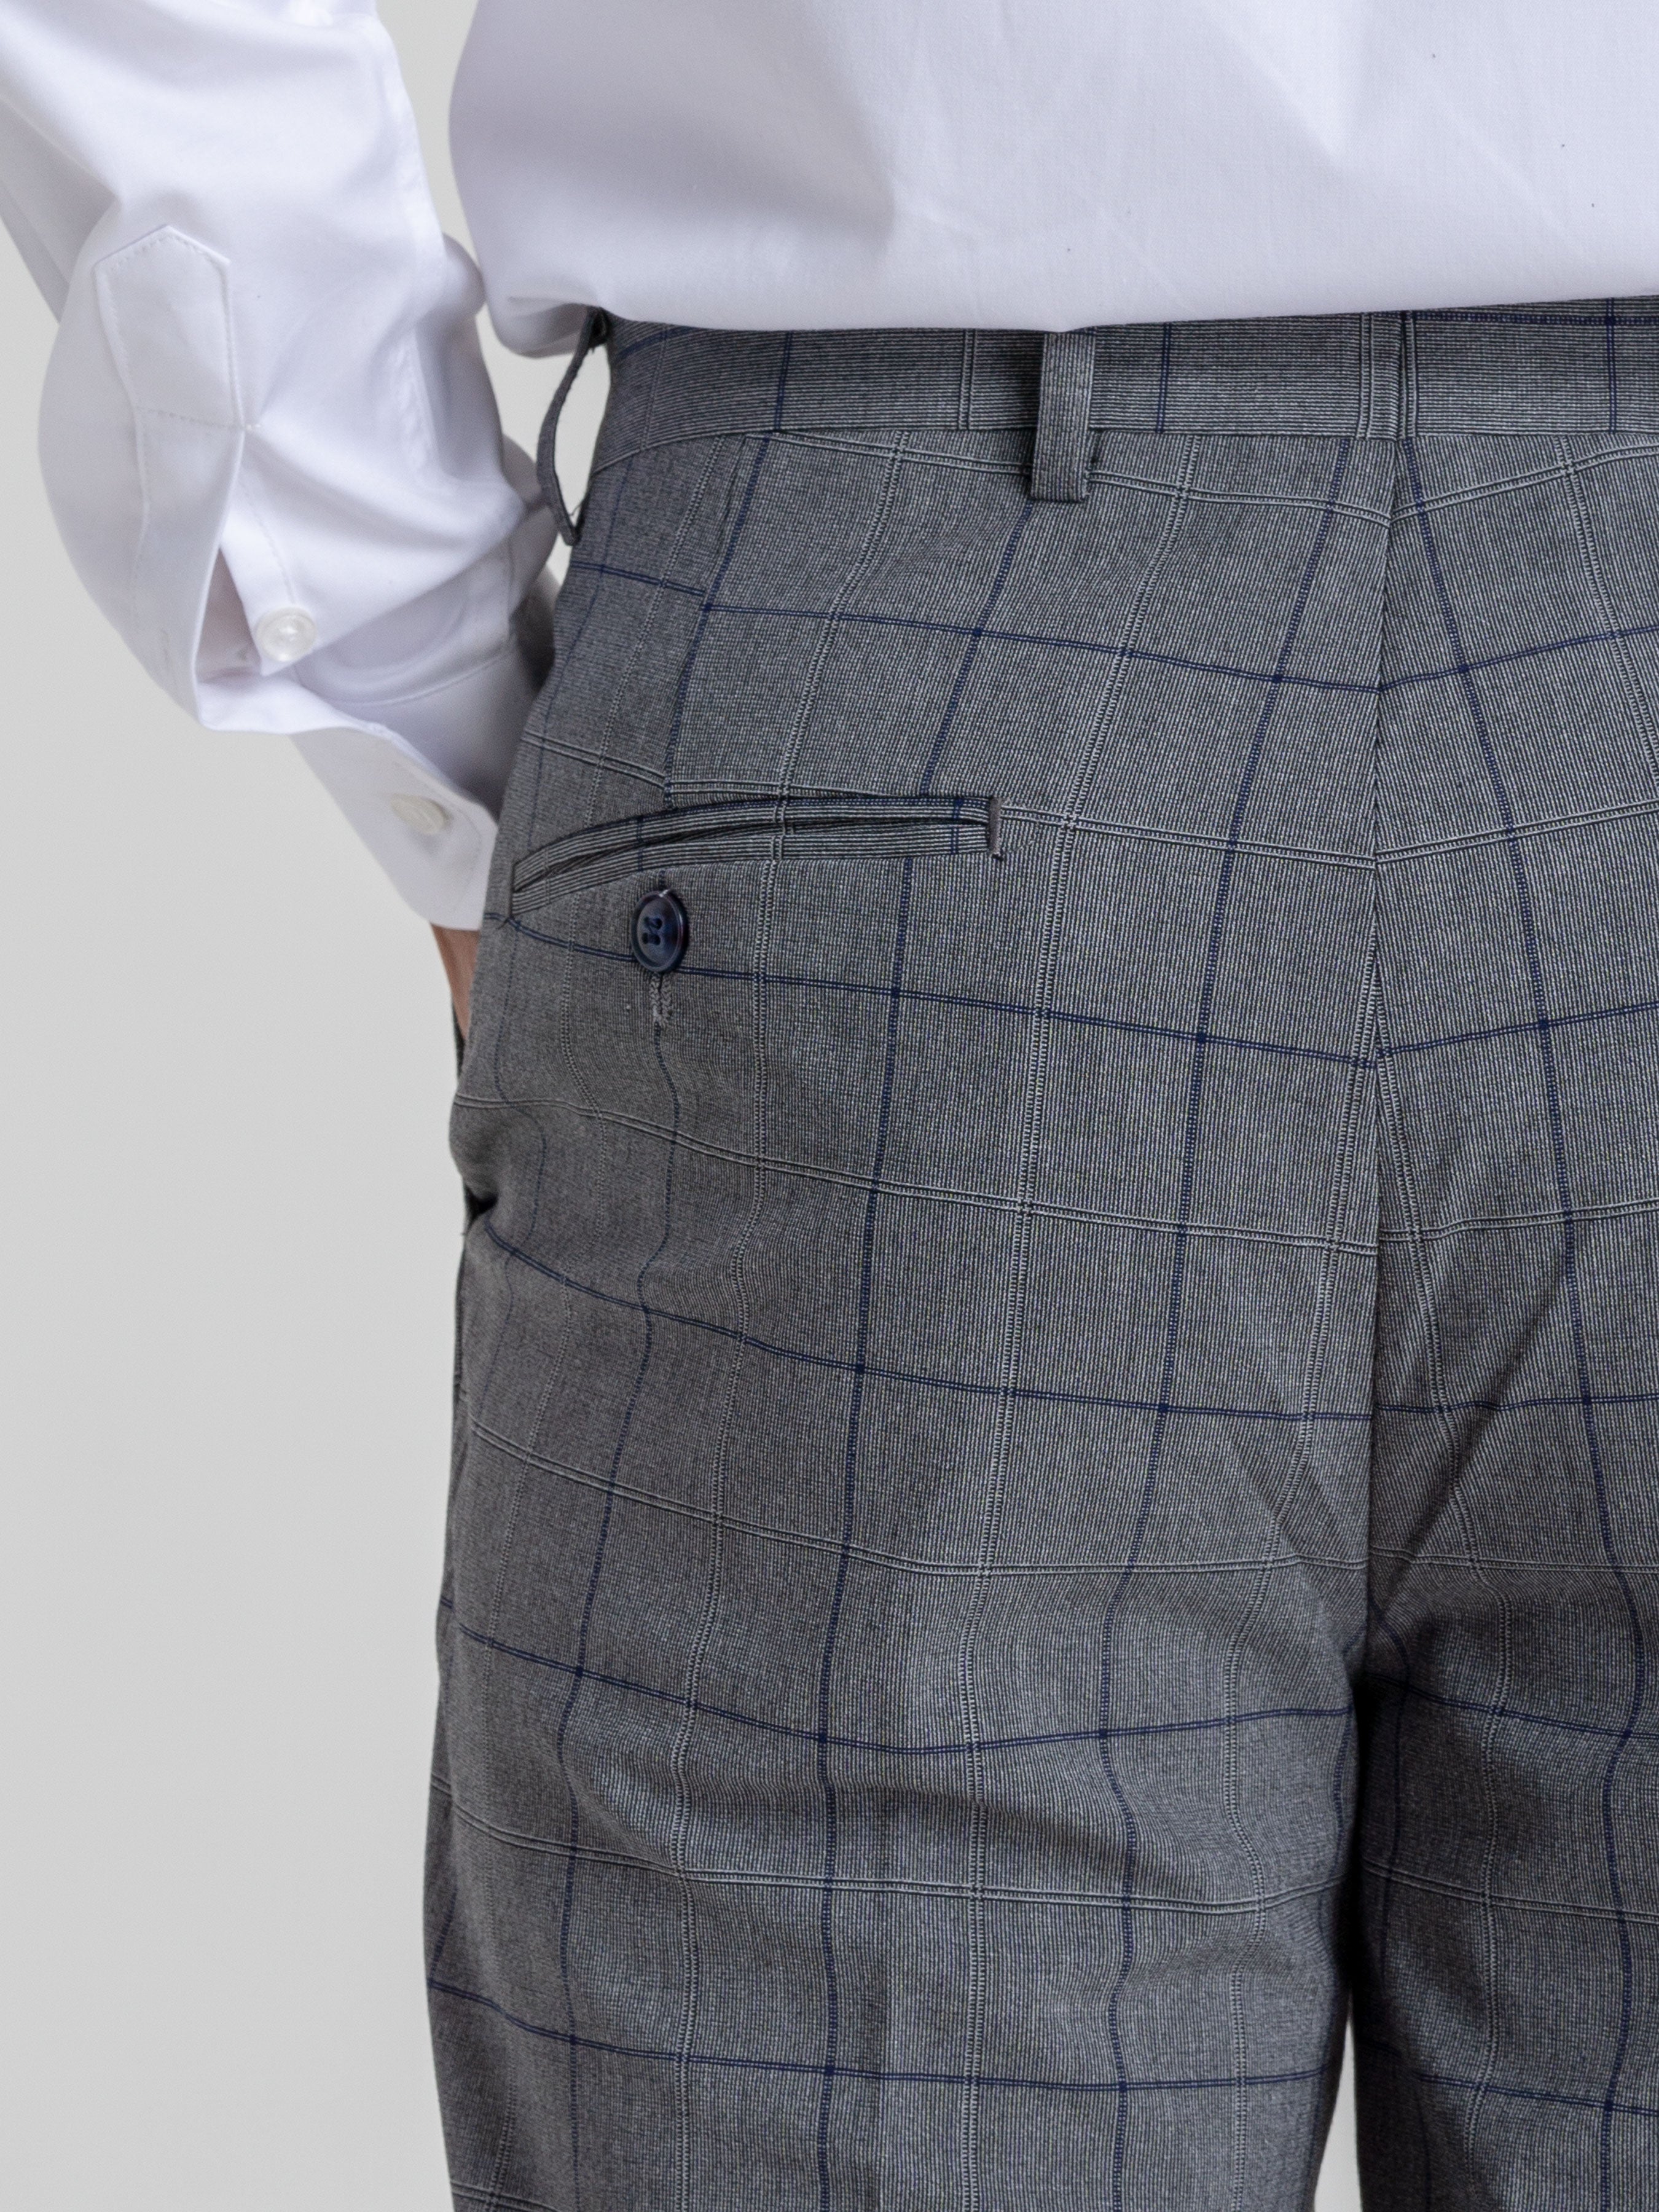 Trousers With Belt Loop - Dark Grey With Blue Line Windowpane Checkered (Stretchable) - Zeve Shoes